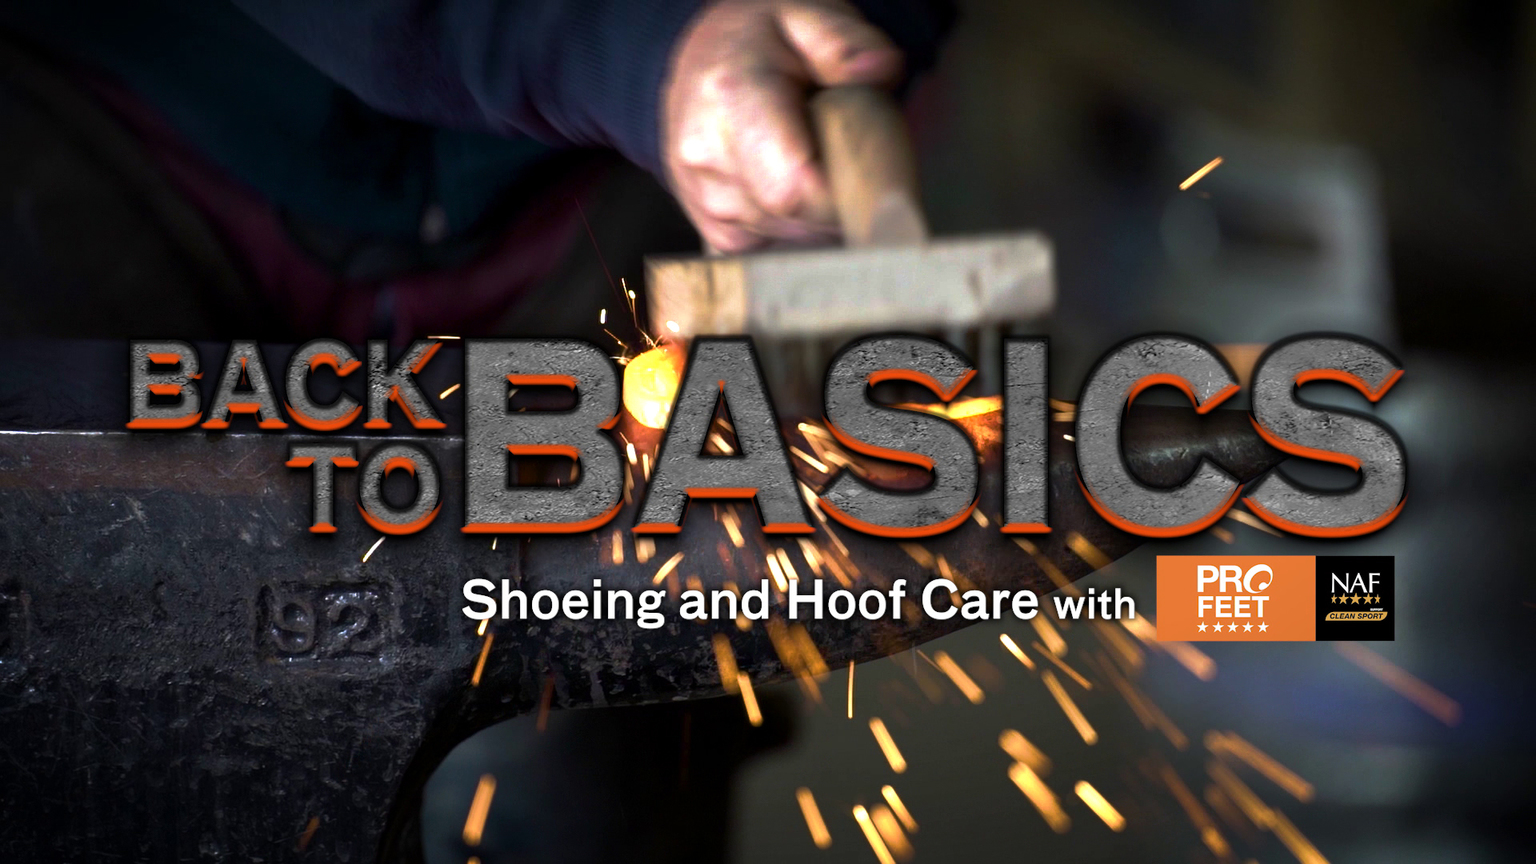 Back to Basics: Shoeing & Hoof Care with NAF